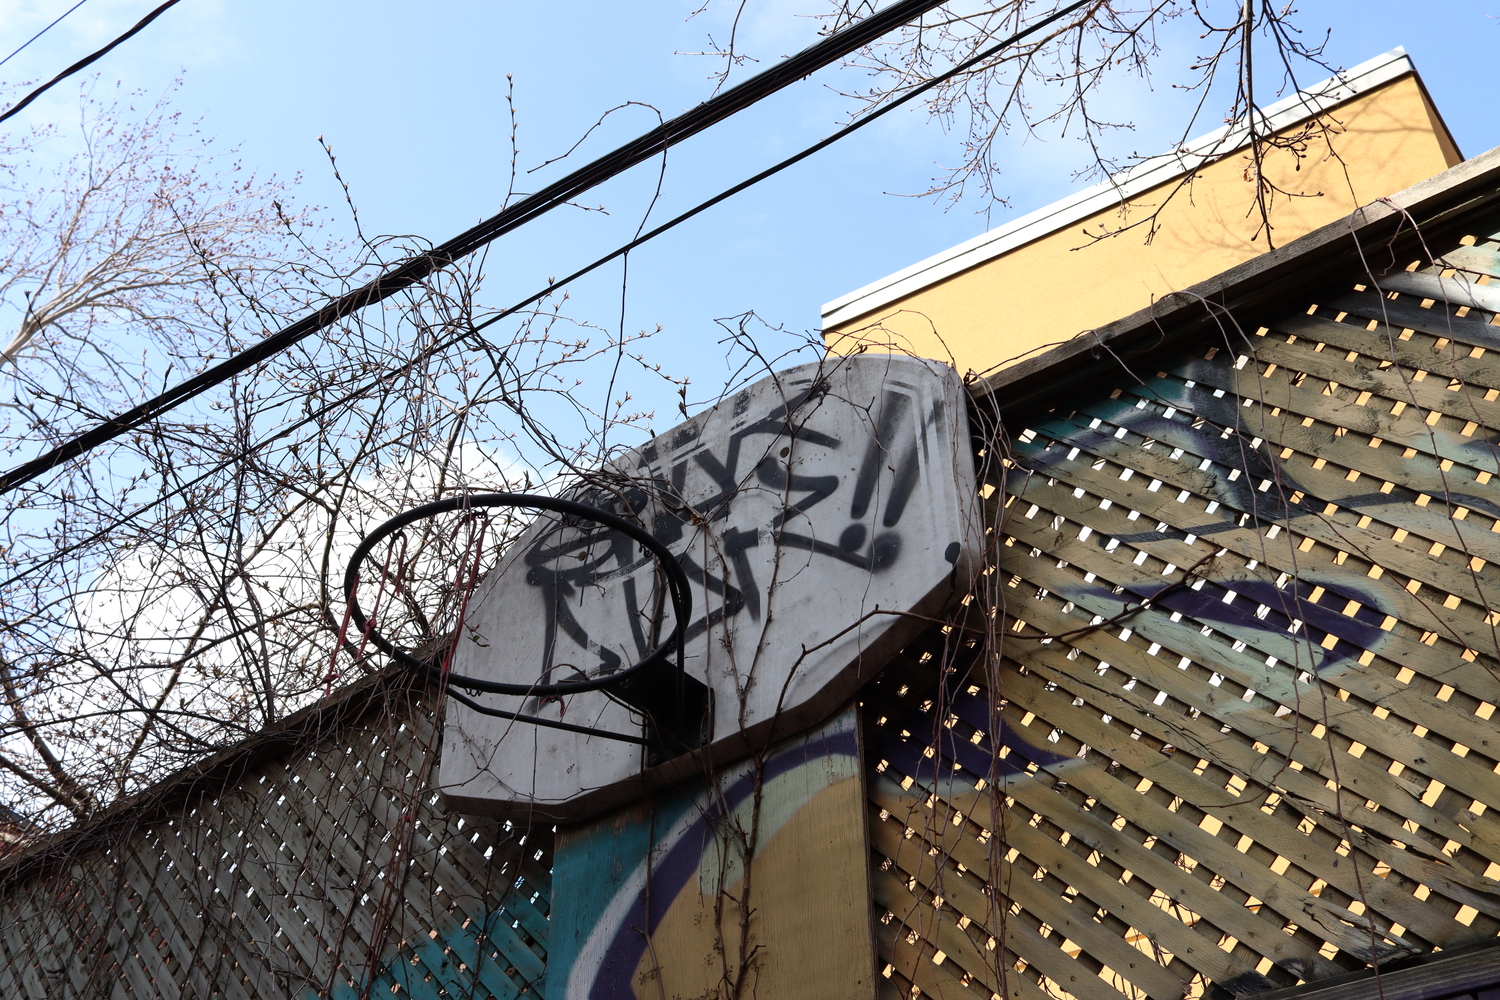 an old backetball hoop mounted in an alley.
the backboard has been graffitied
and vines have invaded.
a few red strands of net are left hanging from the hoop.
the fence behind is painted with a design of yellow, purple, white and blue.
it's the kind of hoop airbud might be hanging around.